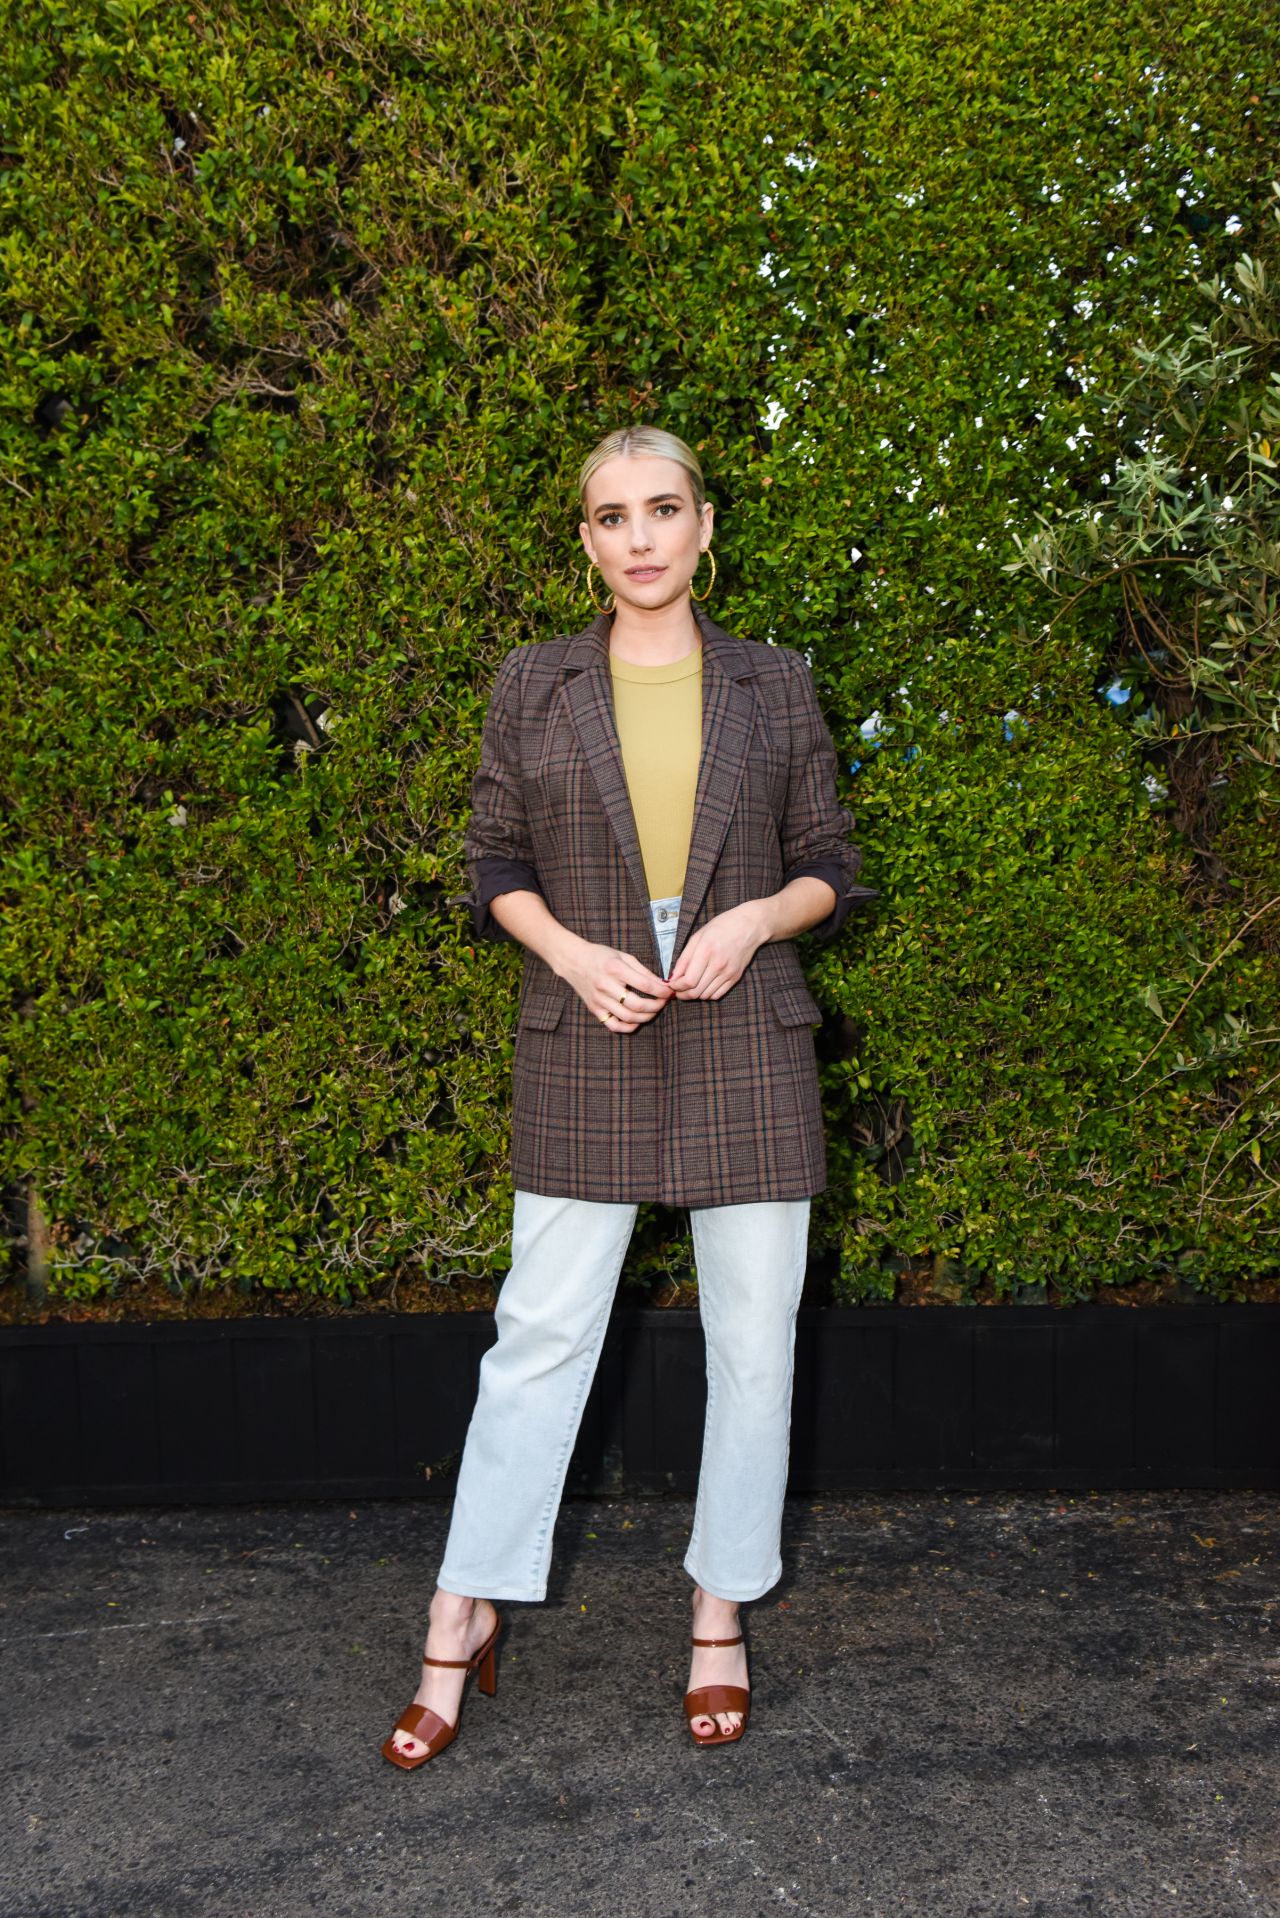 Emma Roberts Goes Wednesday Addams Chic at Vince Camuto Pop-Up in